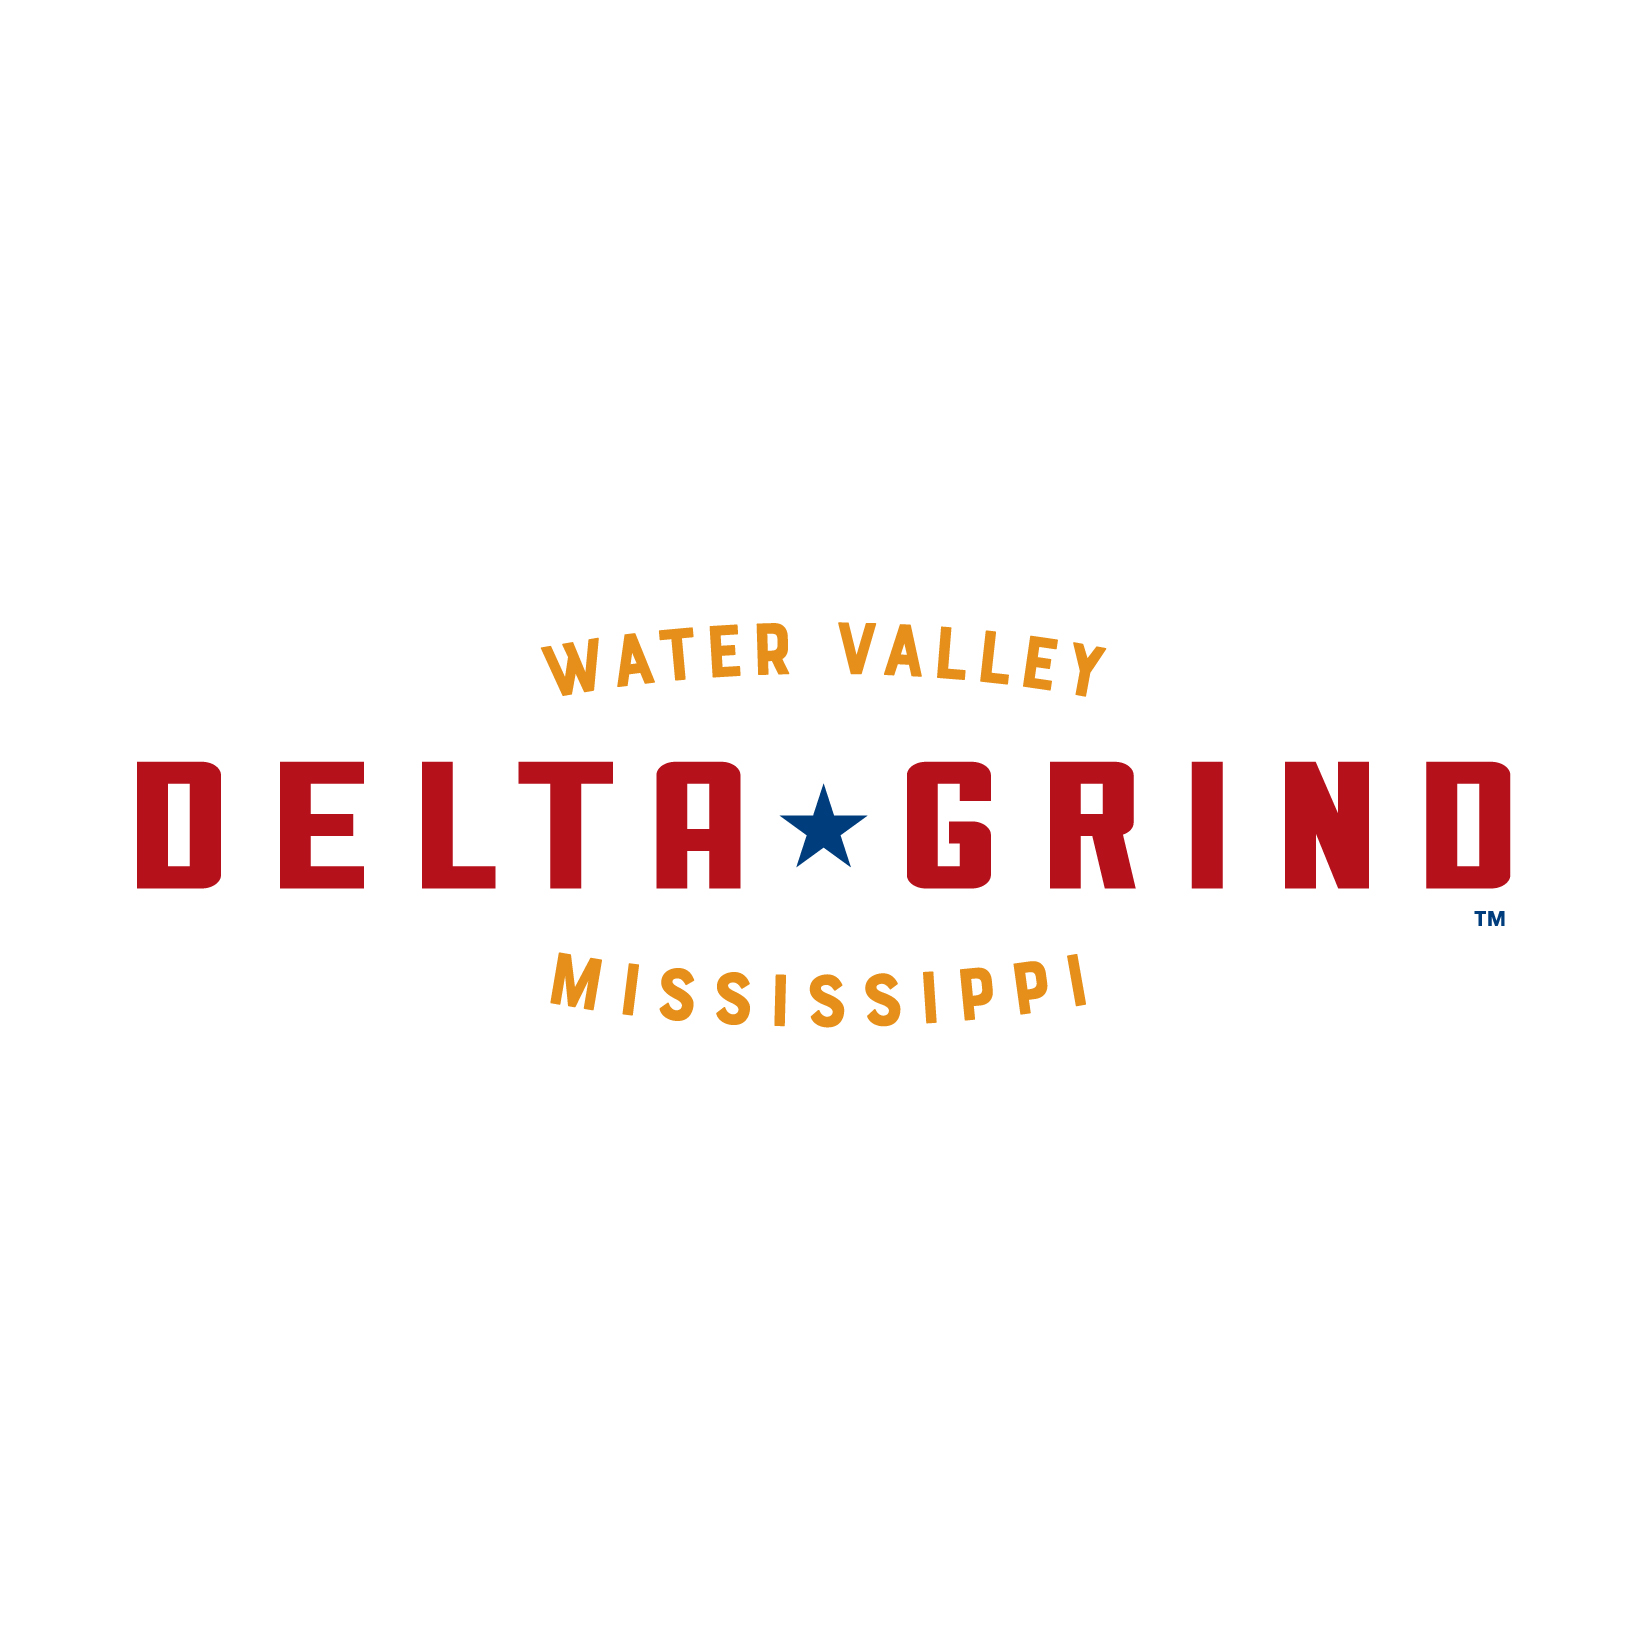  Delta Grind logo  Creative and design by Chuck Mitchell  for Delta Grind Stone Ground Products, LLC 